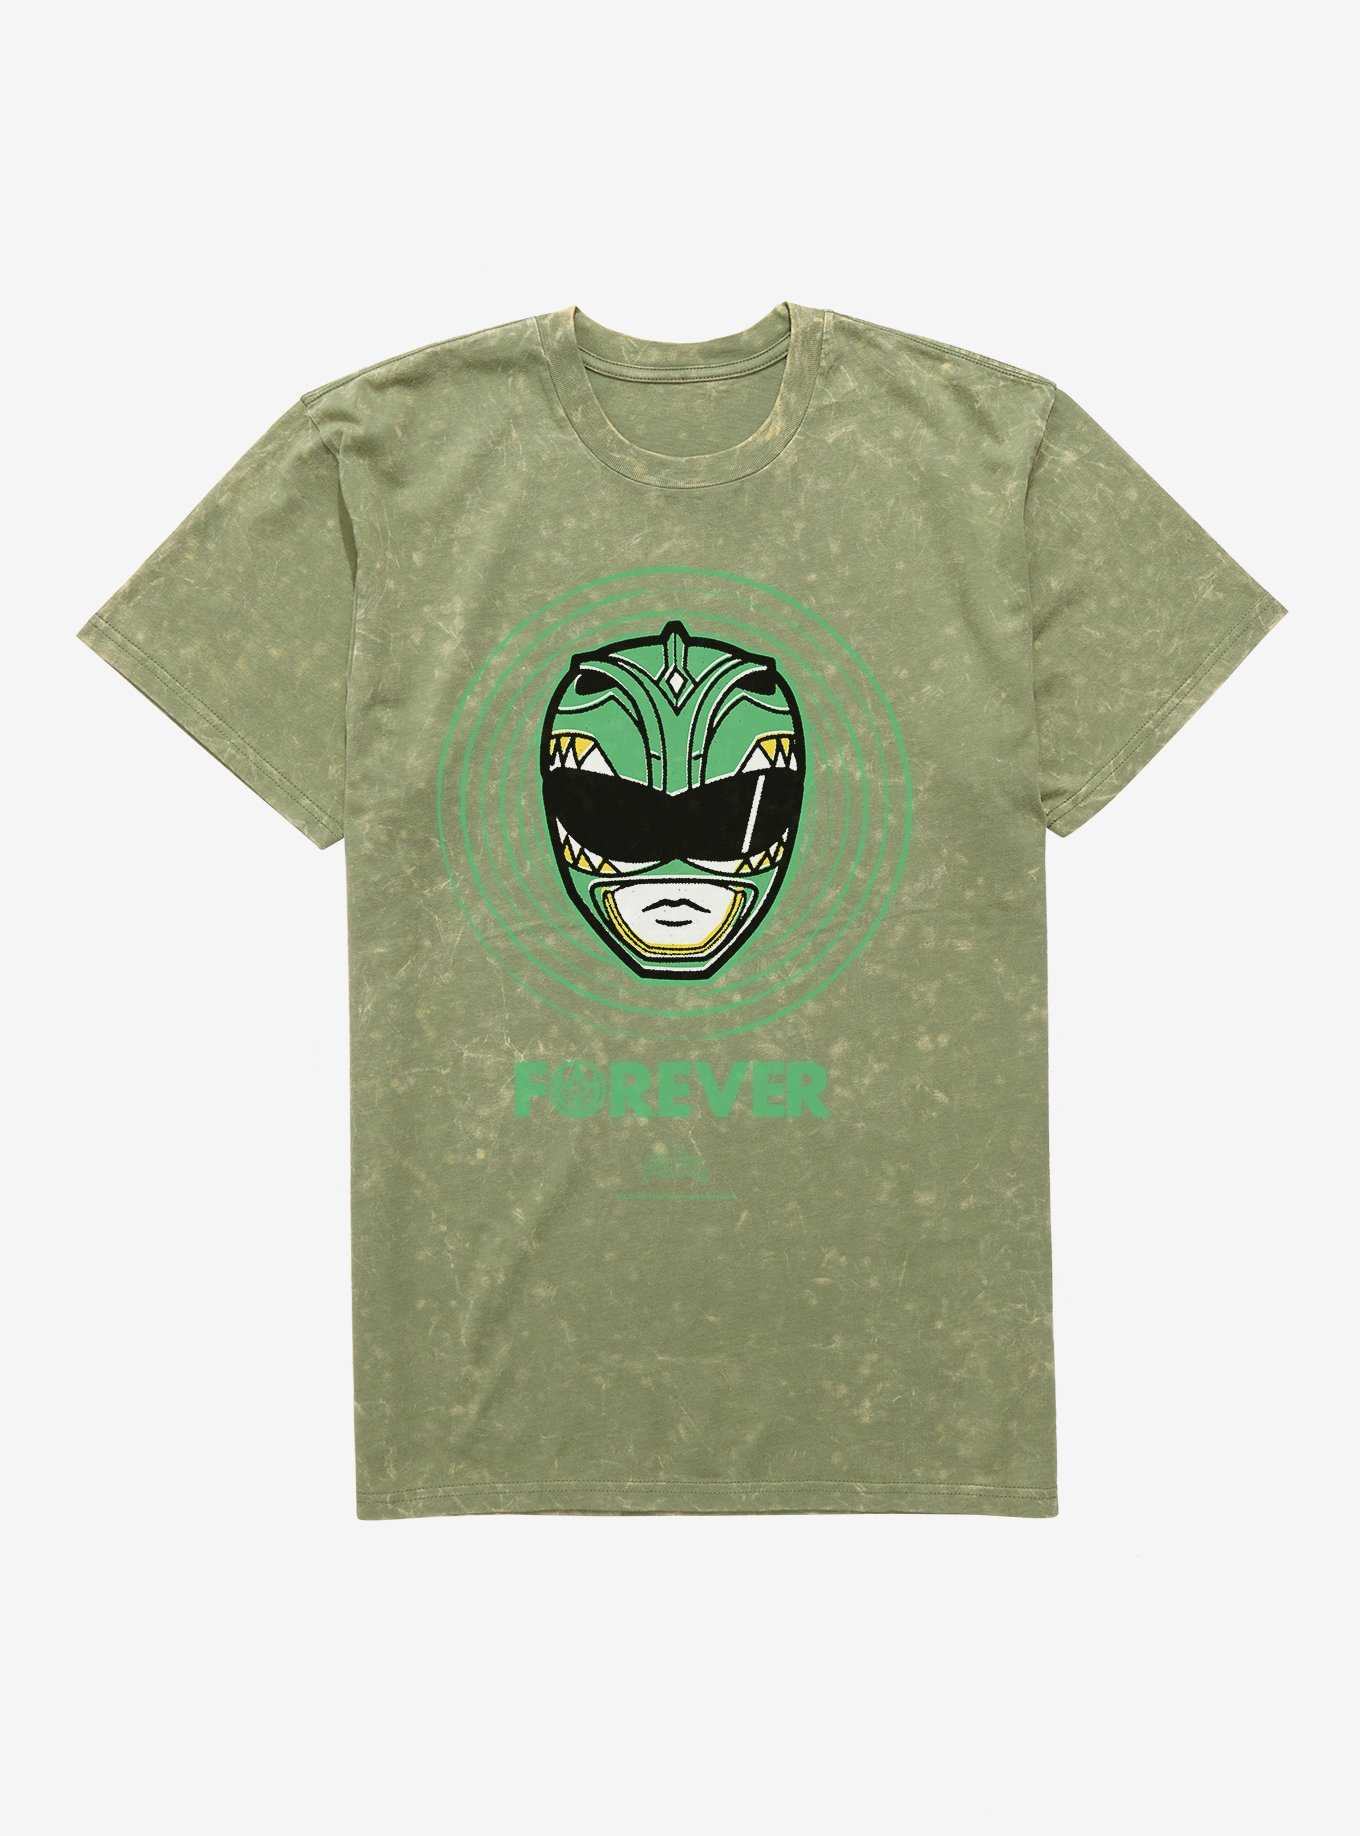 Mighty Morphin Power Rangers Green Ranger Forever Mineral Wash T-Shirt, , hi-res